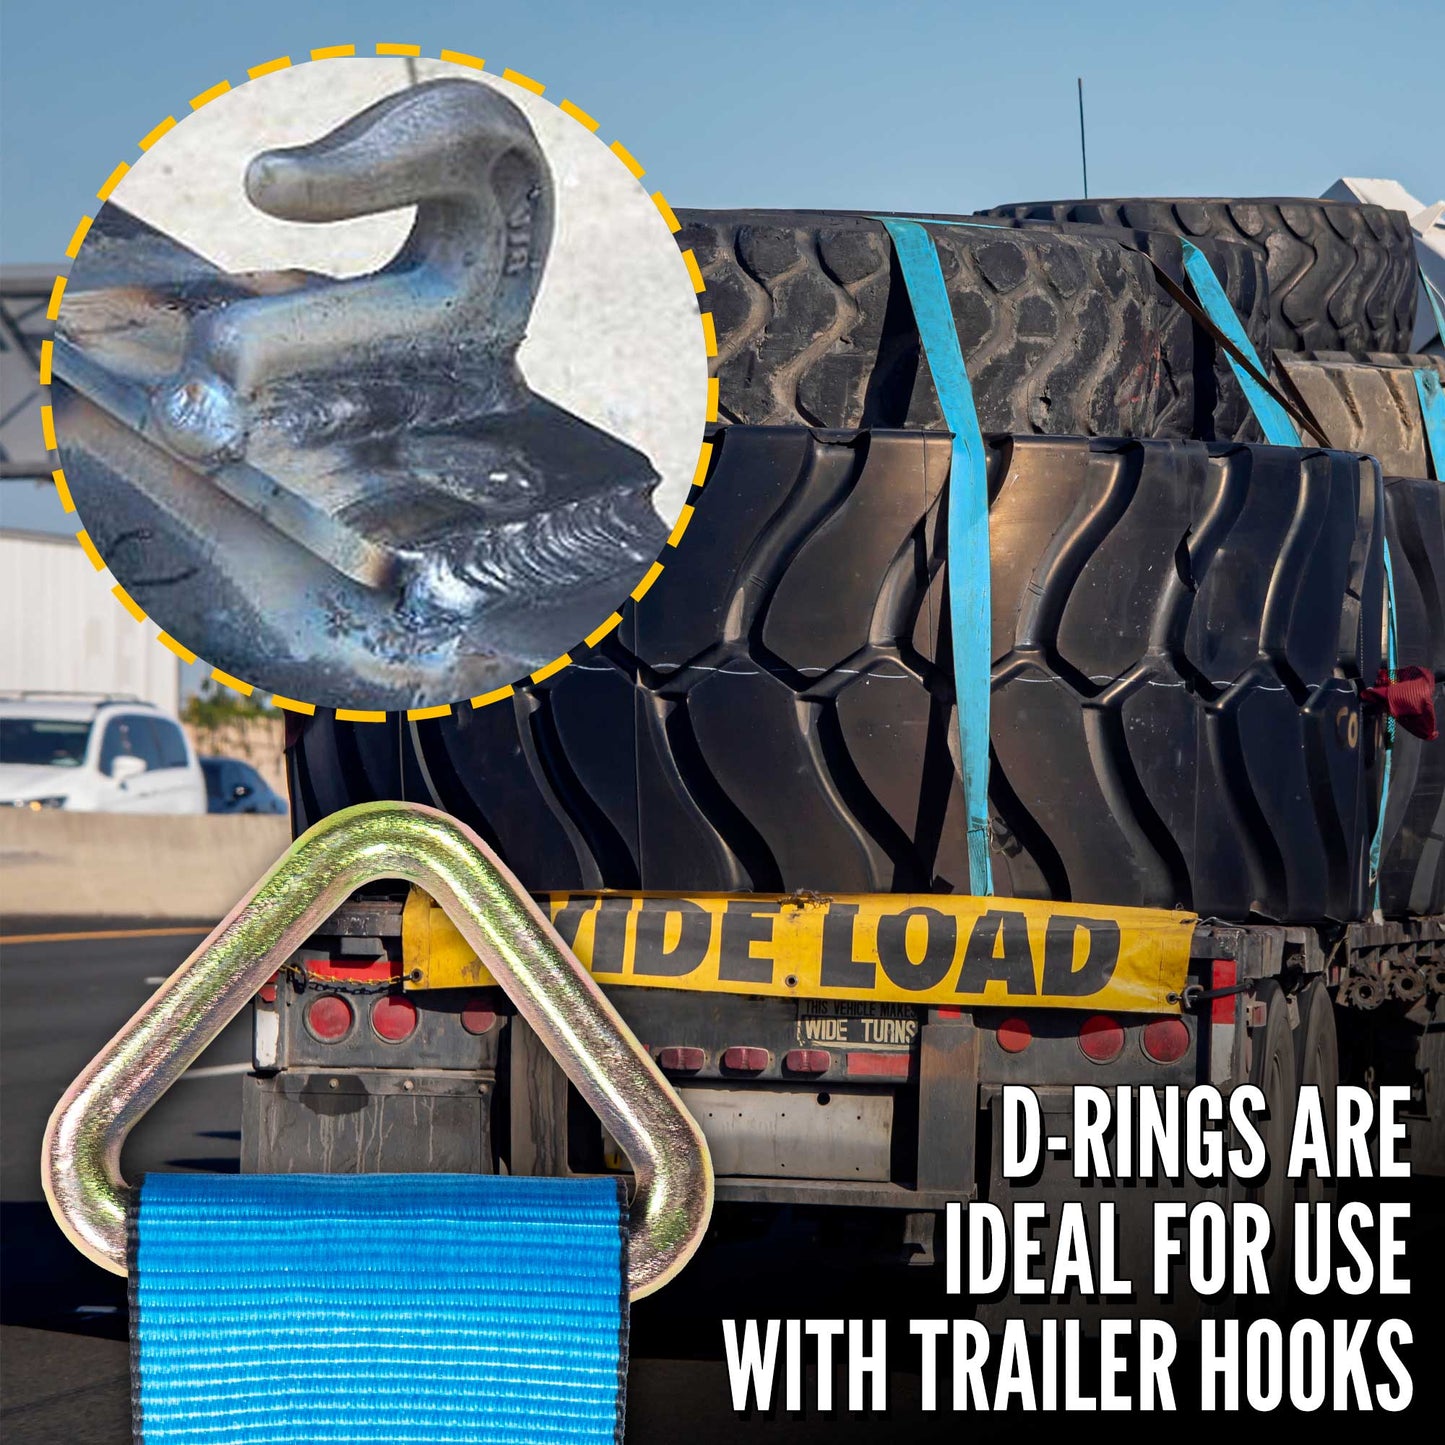 27' D ring straps are ideal for use with trailer hooks